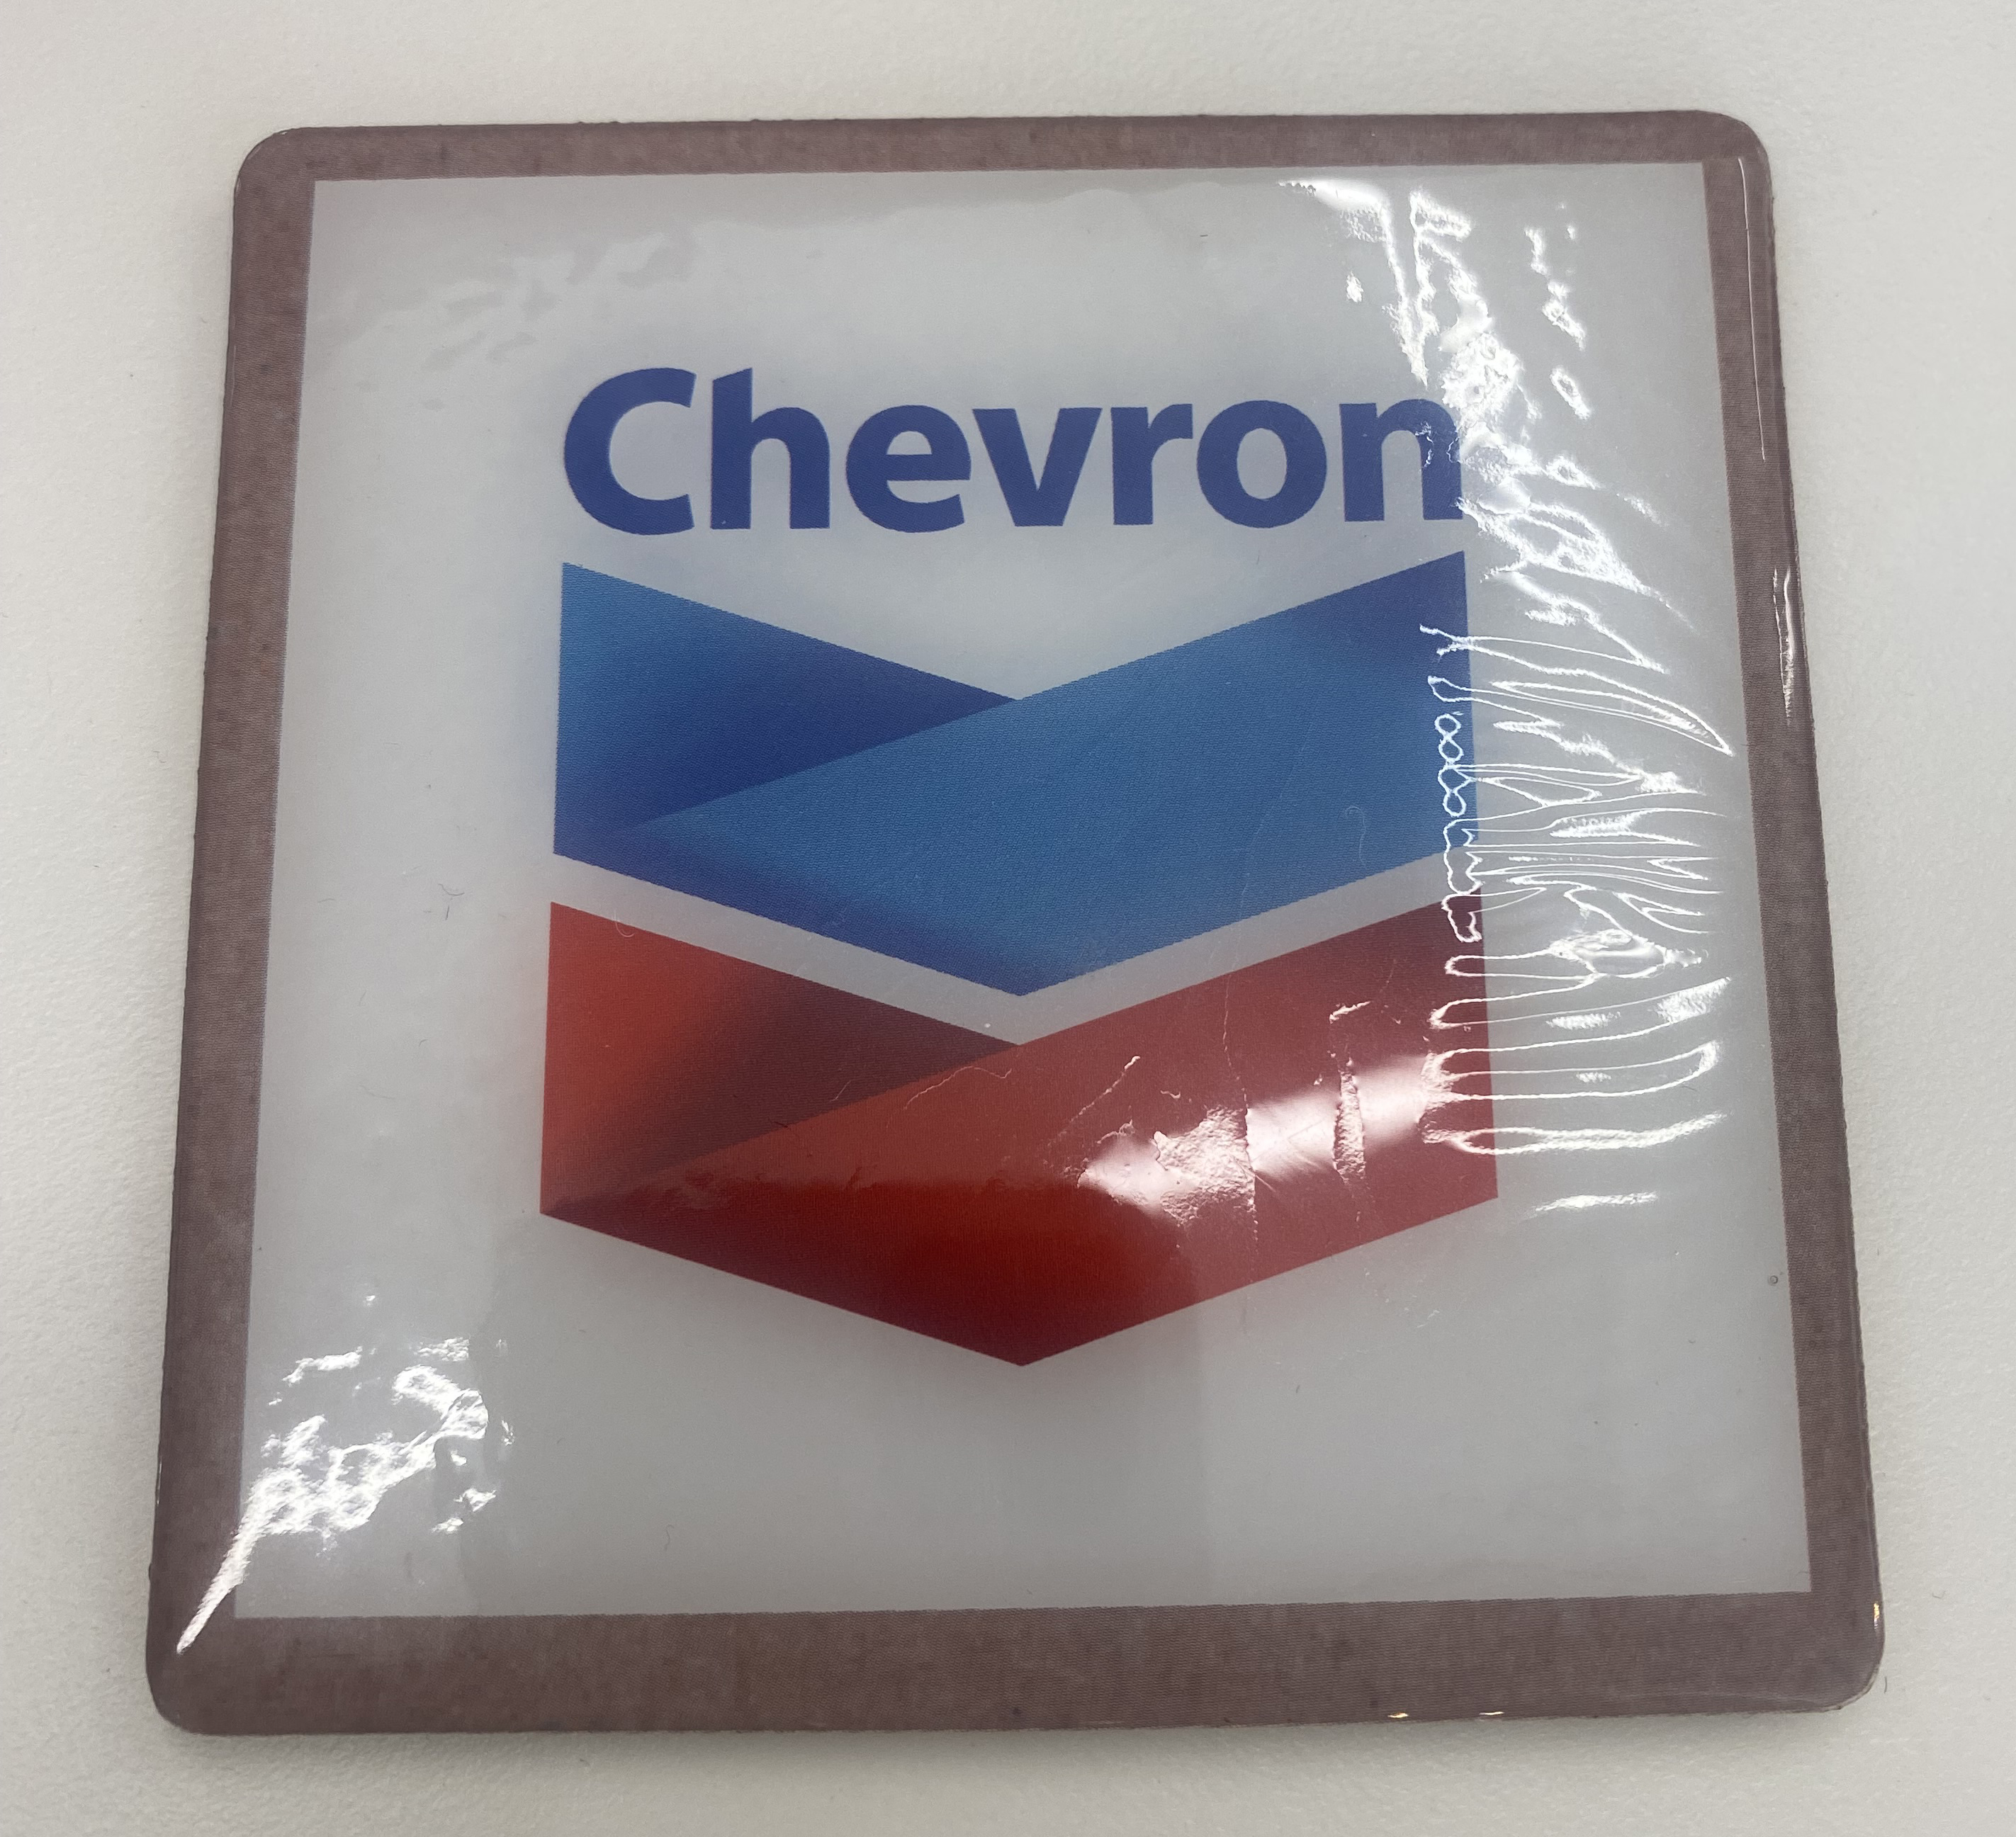 Chevron sponsored the Améthyste event at the French ambassador's residence last December, which brought together a number of Washington bigwigs from both parties and featured Chevron-branded coasters.